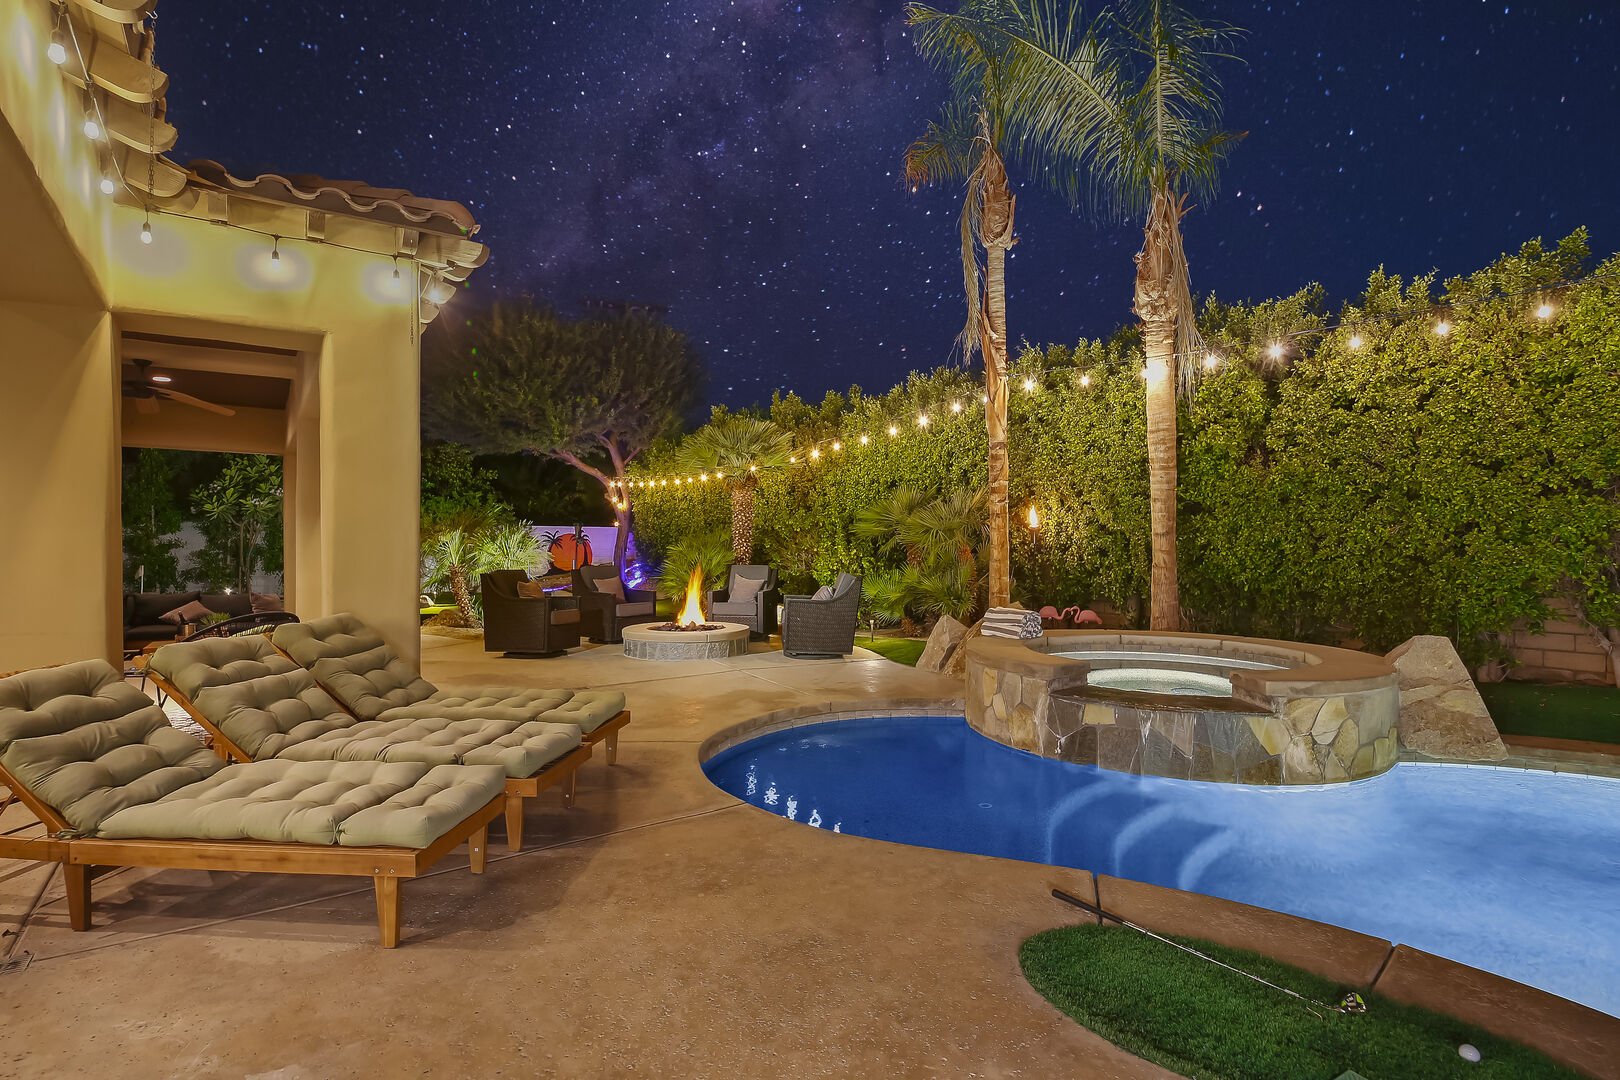 Outdoor patio lights and 15+ ft hedges provide both light by night and maximum privacy for you during your stay.